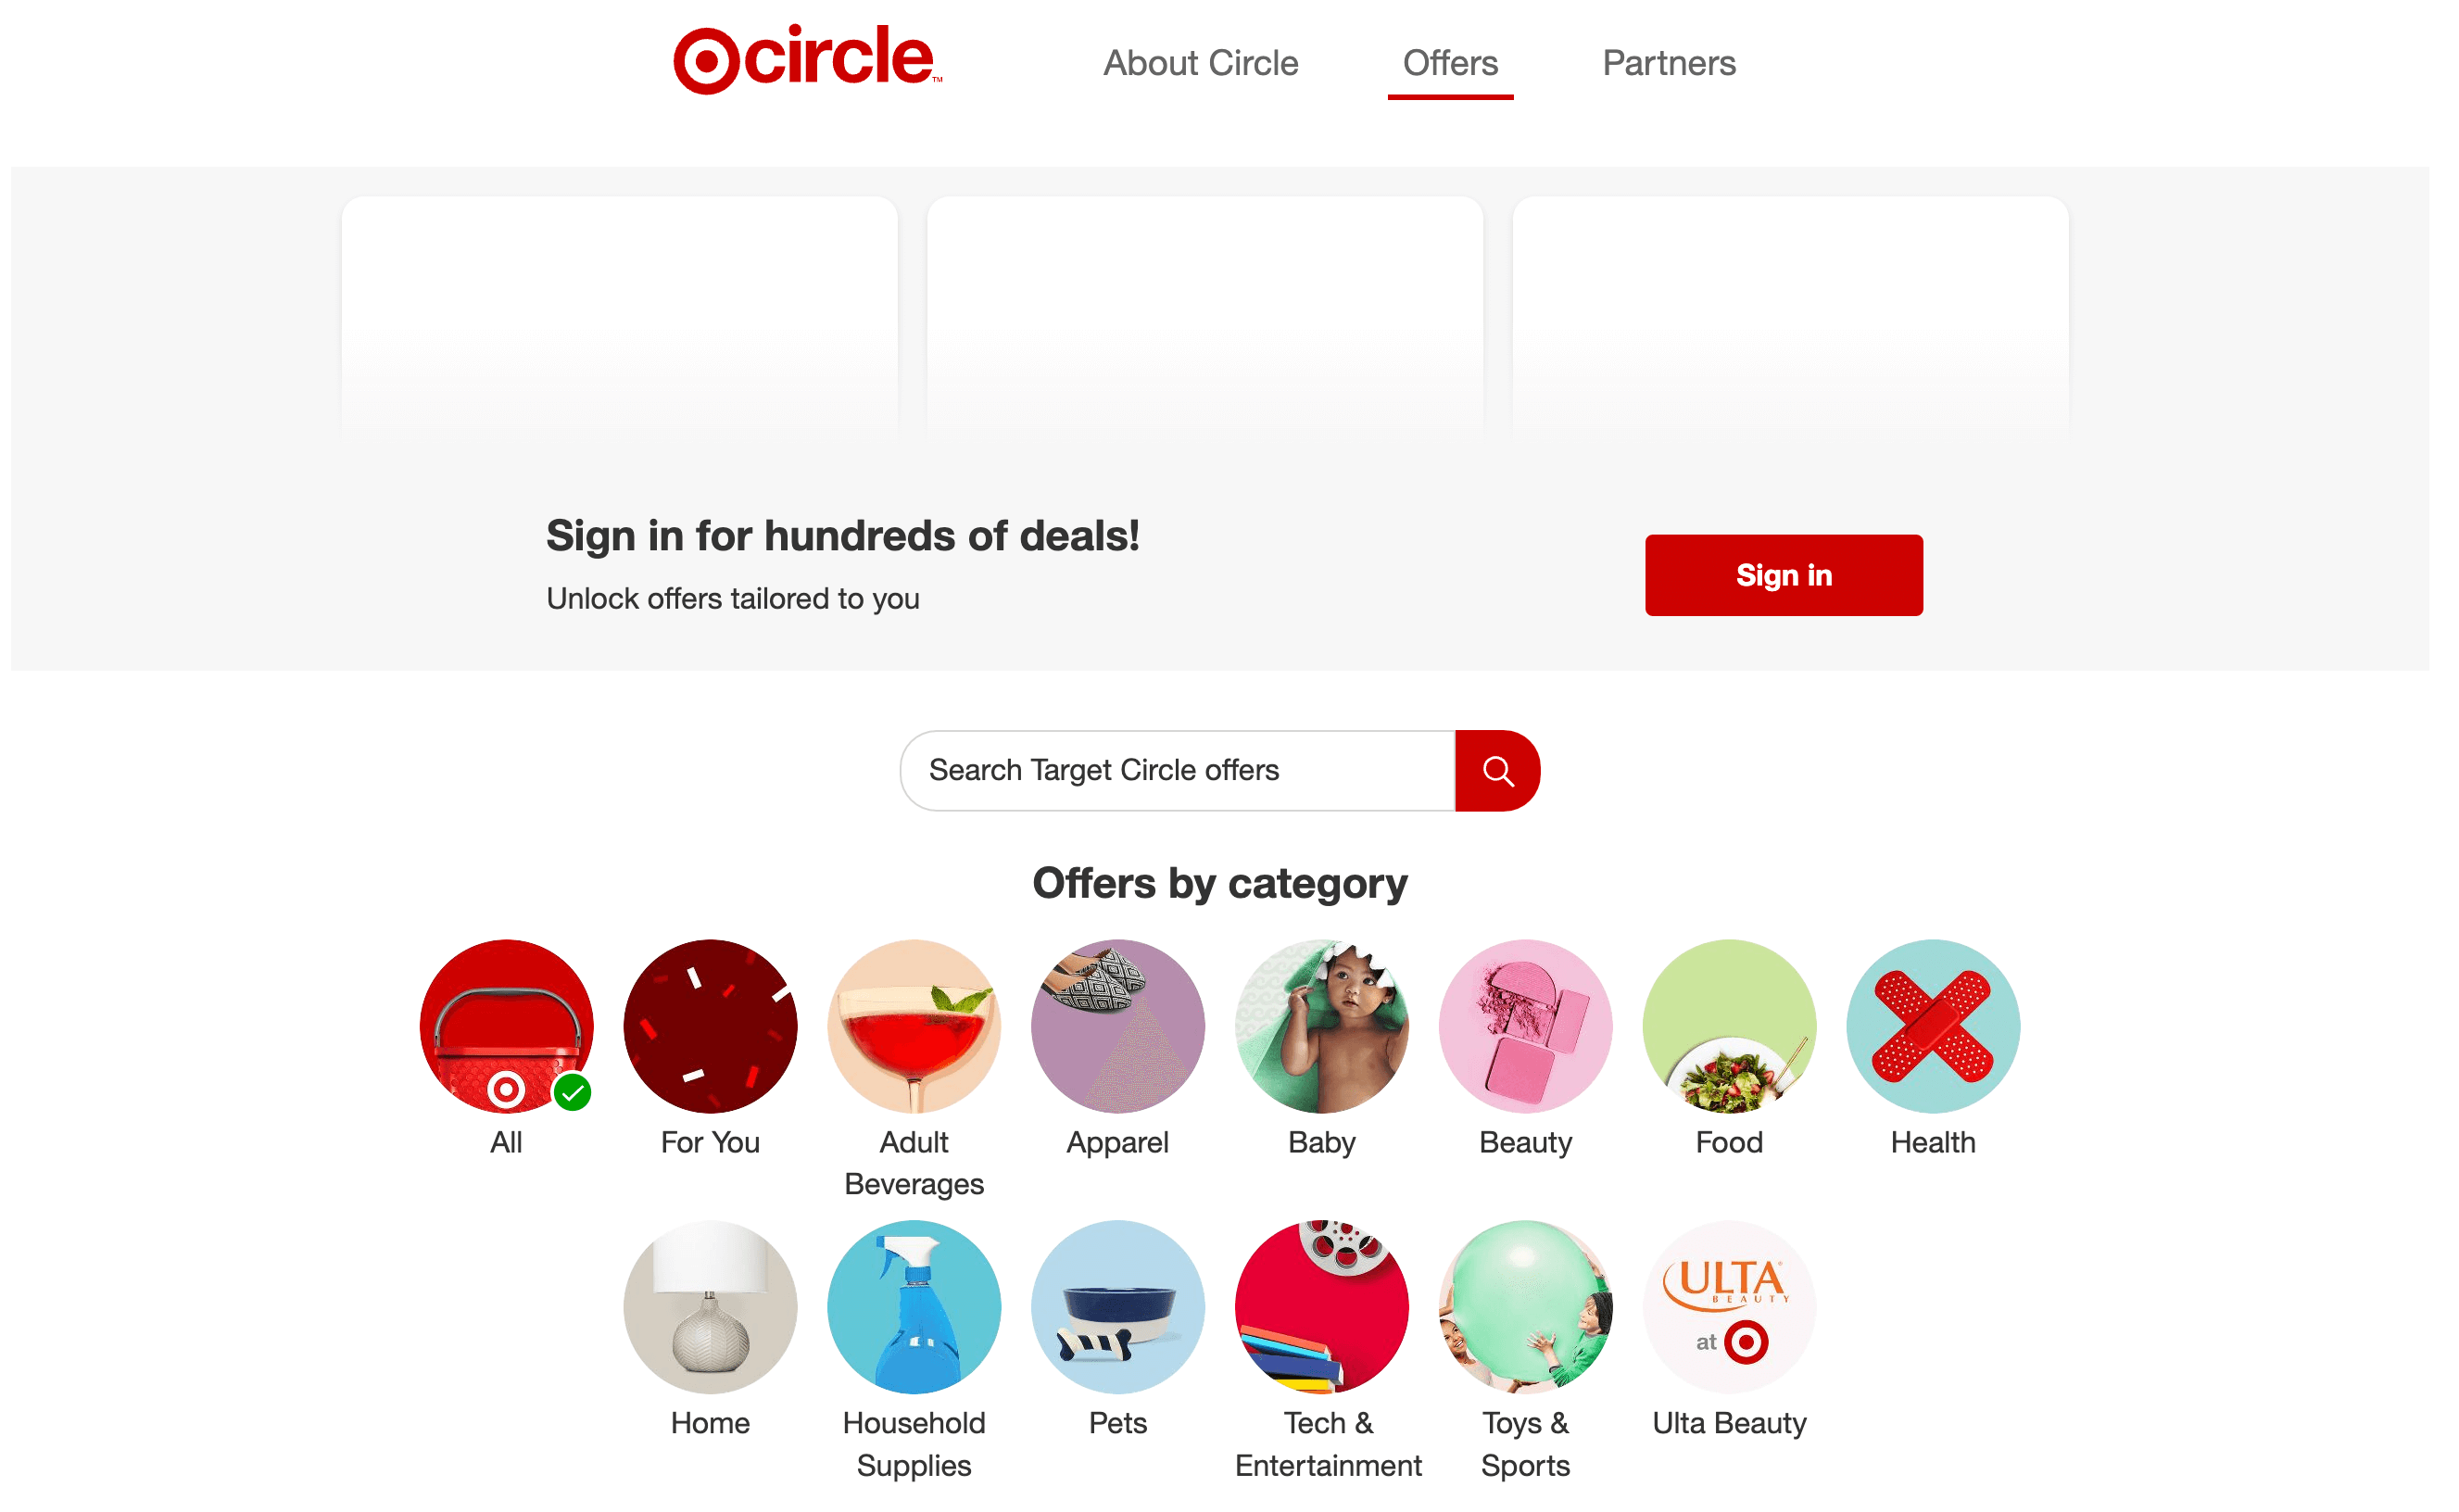 A screenshot of Target Circle’s offer page on its website. The banner reads: Sign in for hundreds of deals! Unlock offers tailored to you. Next to the text is a red call to action button that says Sign in.Below that is a search bar reading: Search Target Circle offers. There is also an Offers By Category section. This part shows 14 different categories with circle icons representing each: All, For You, Adult Beverages, Apparel, Baby, Beauty, Food, Health, Home, Household Supplies, Pets, Tech and Entertainment, Toys and Sports, and Ulta Beauty. 